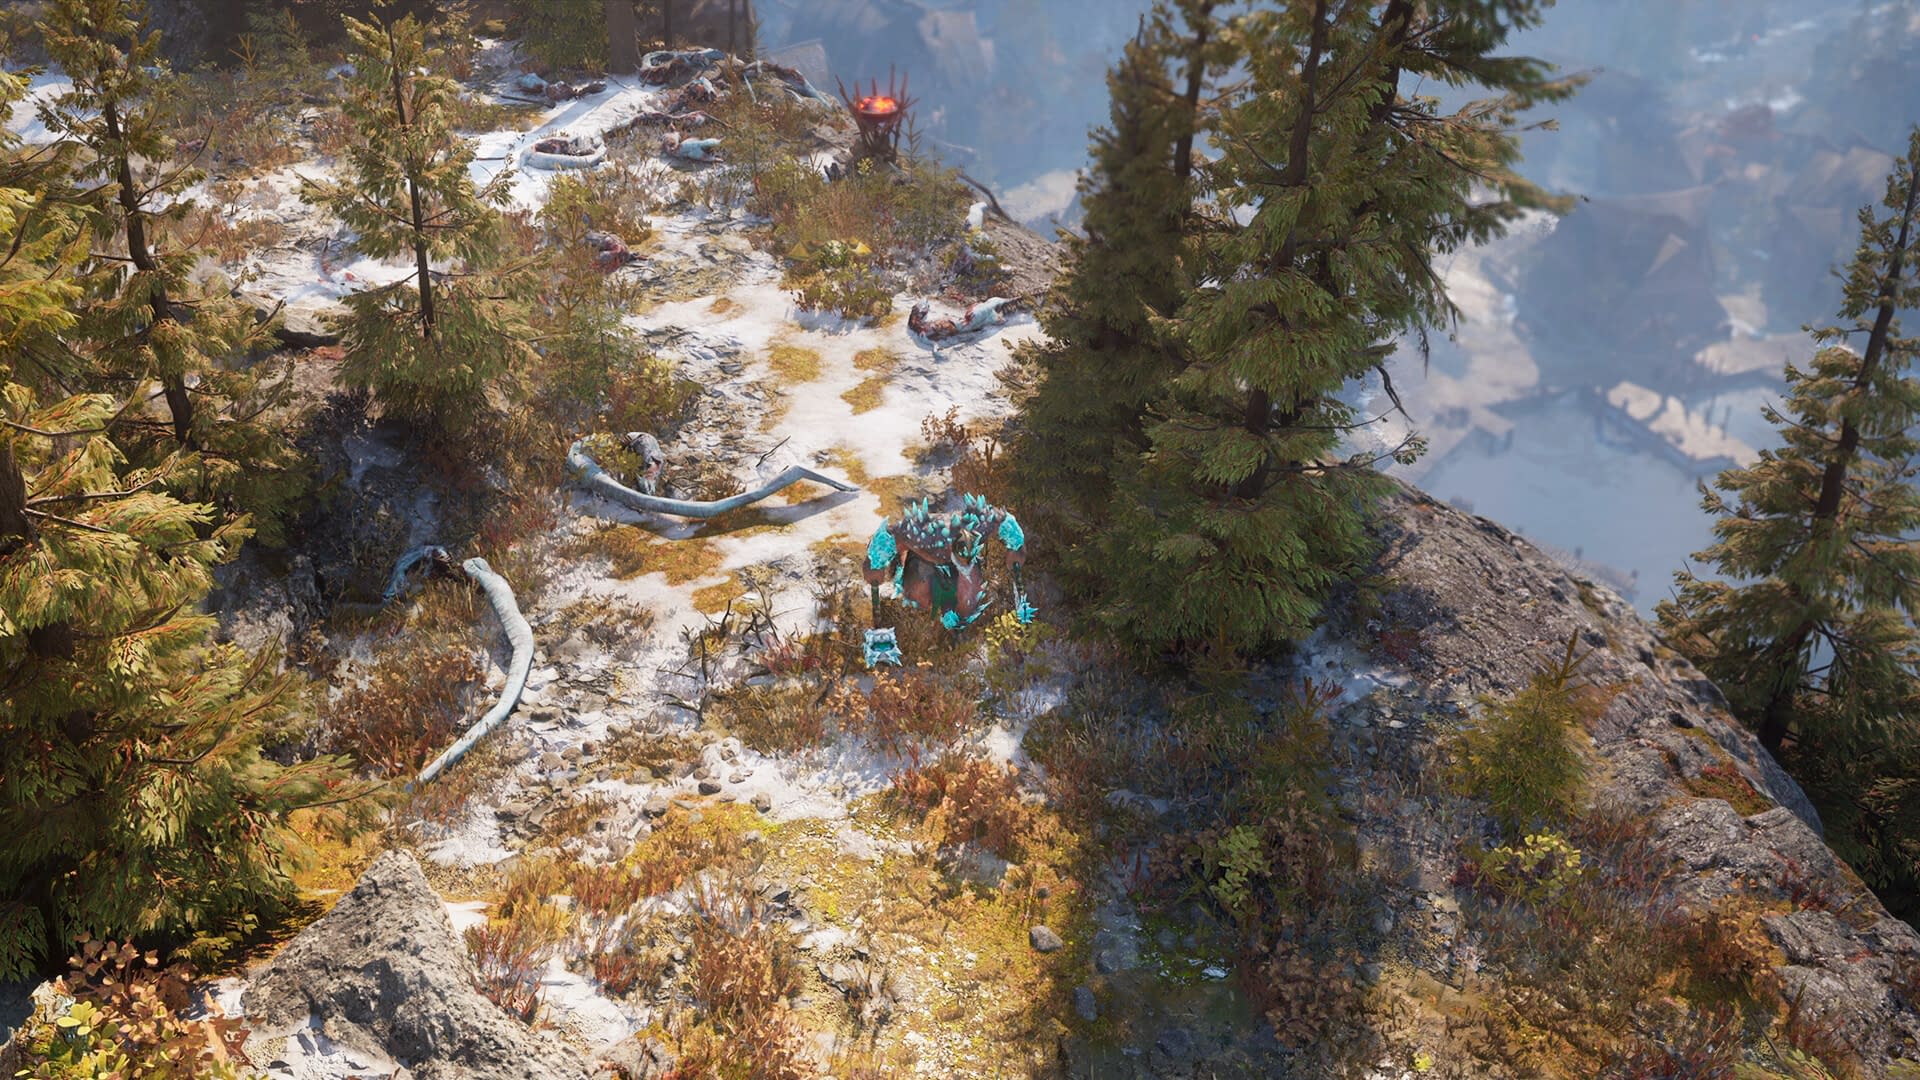 Isometric Roleplay Dragonkin: The Banished Comes On February 2025